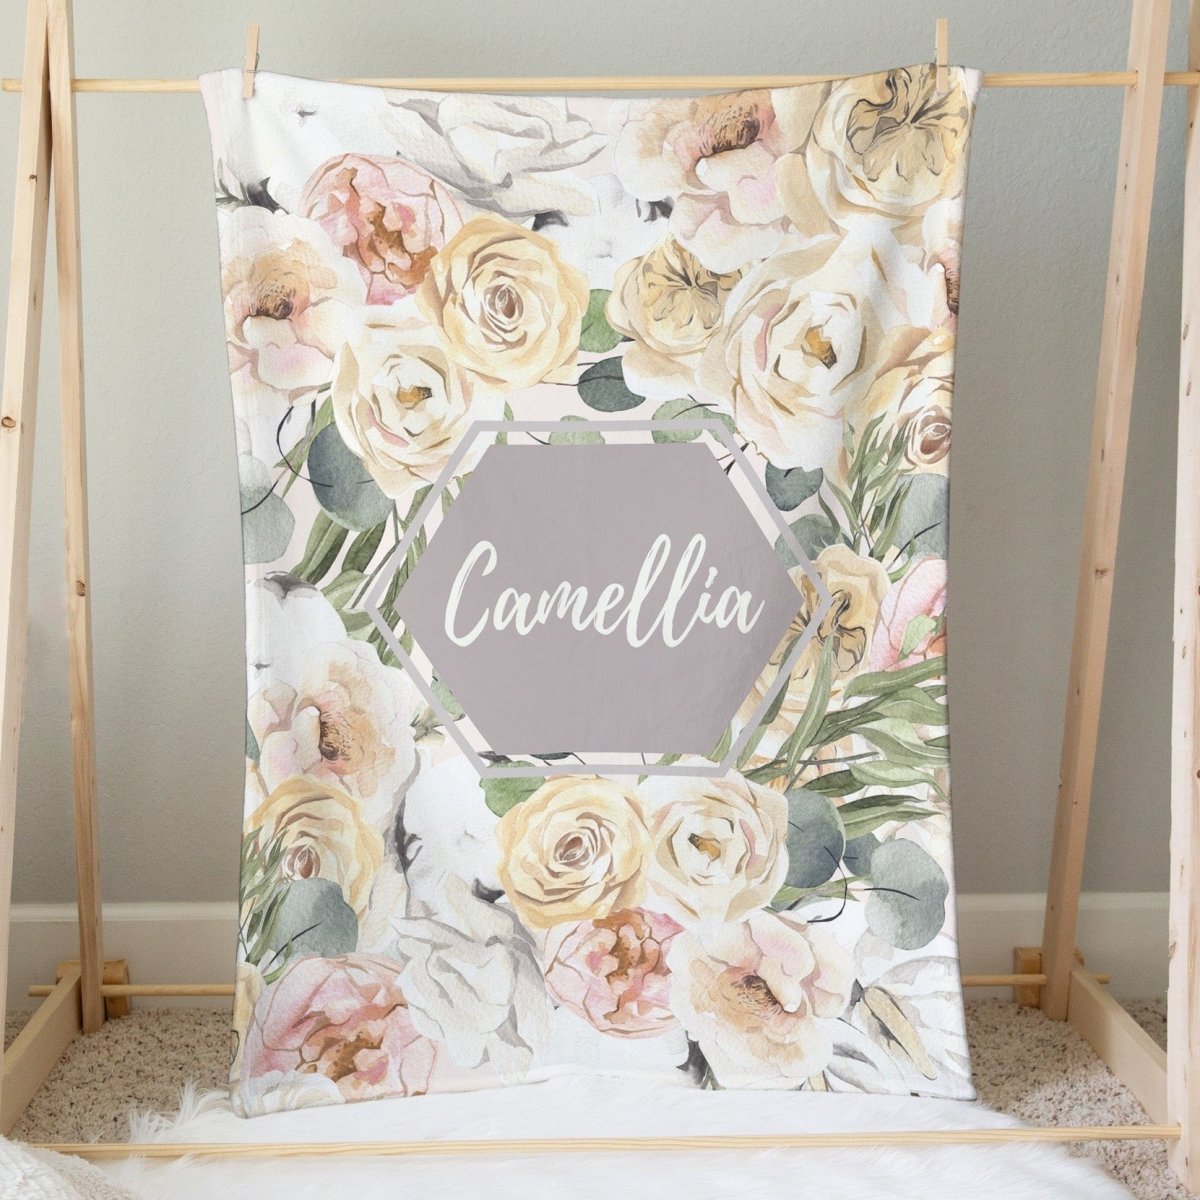 Farmhouse Floral Personalized Minky Blanket - Farmhouse Floral, gender_girl, Personalized_Yes